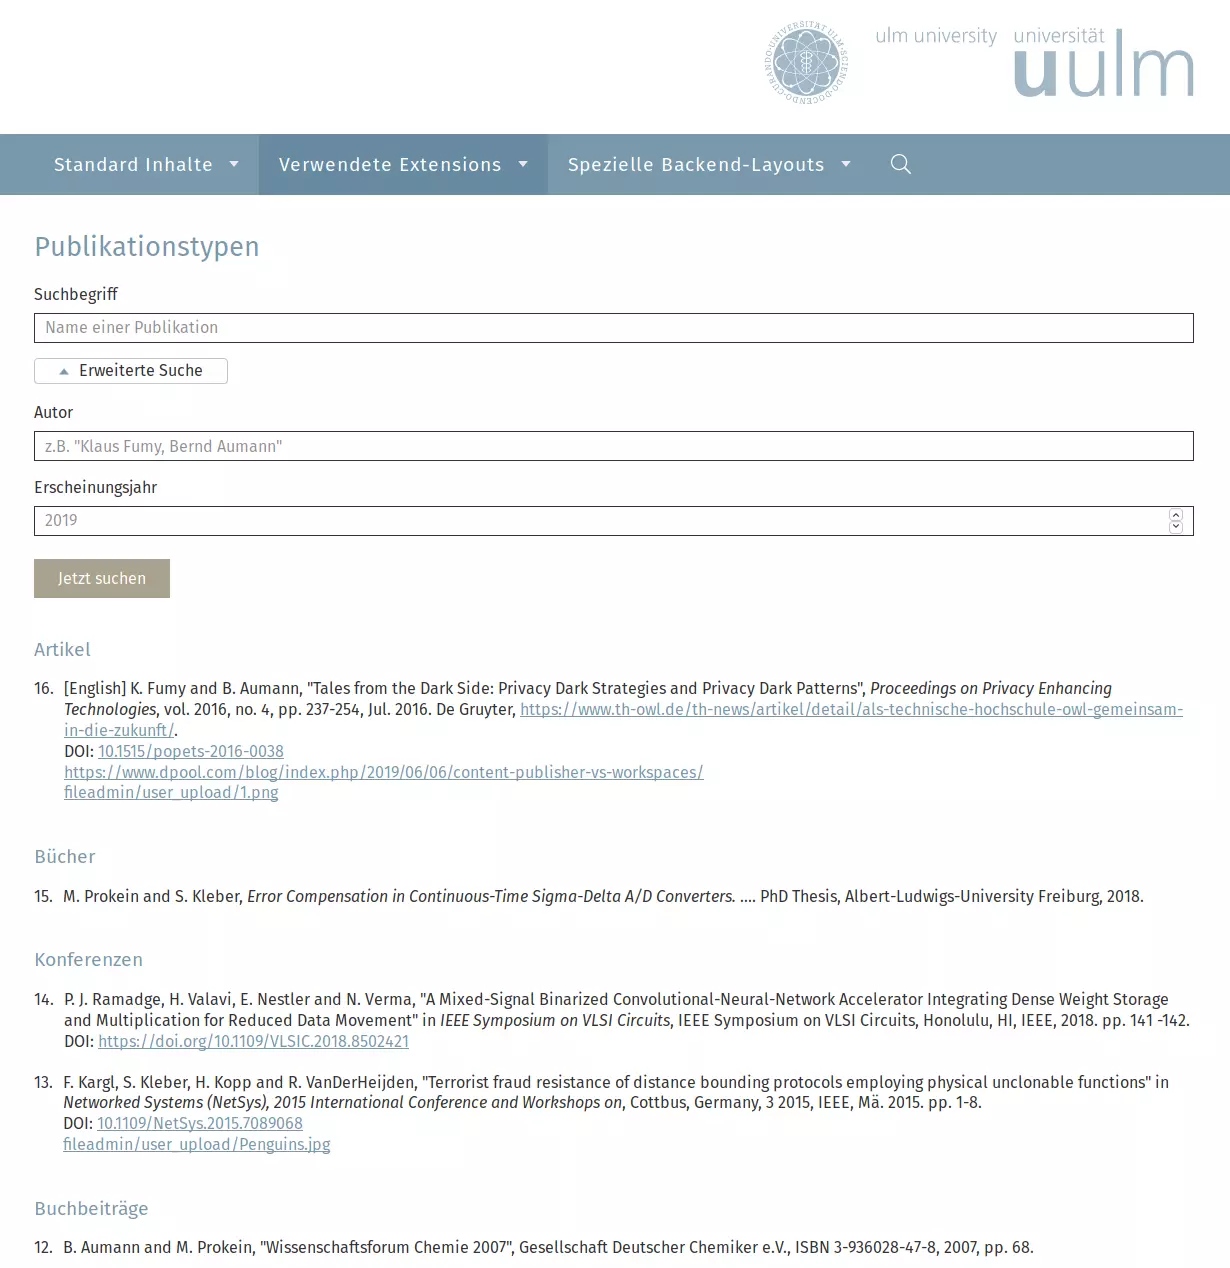 Publications view for your university